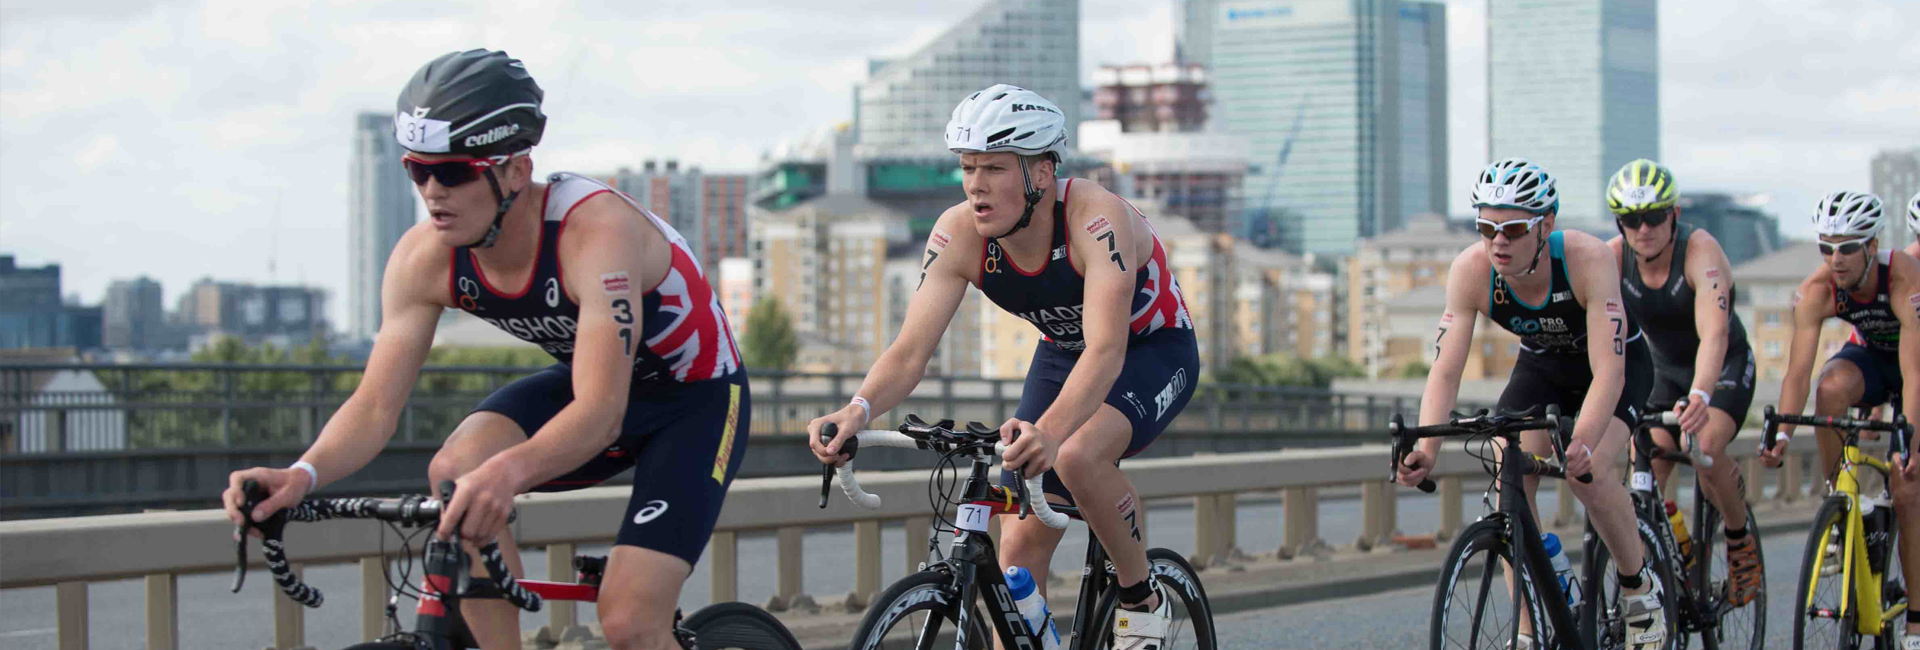 Group of athlete cyclists taking part in a triathlon race